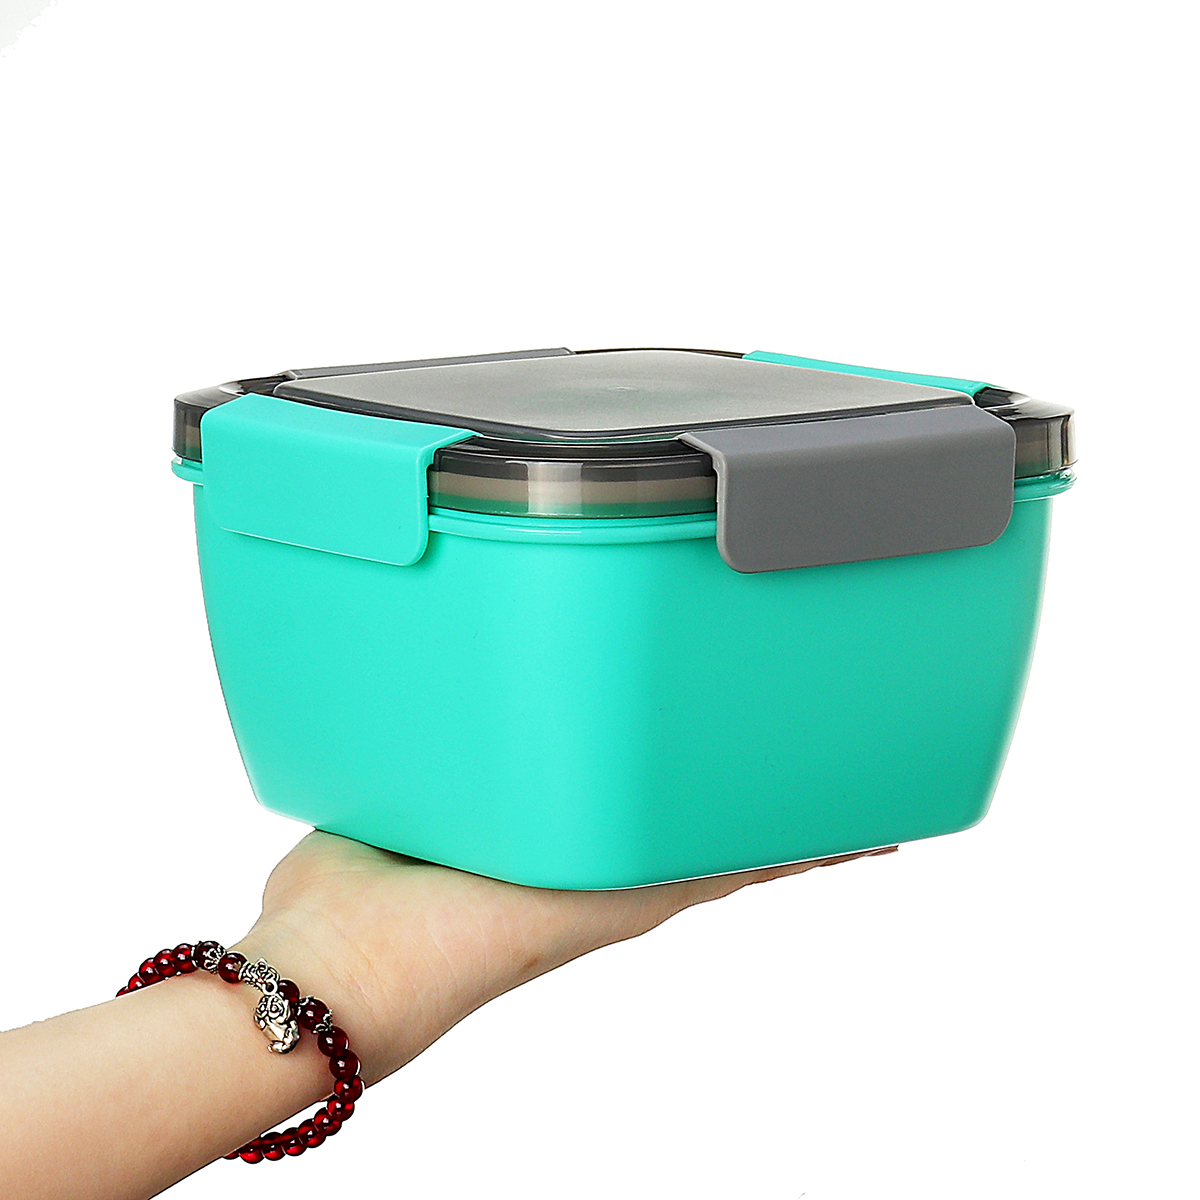 Portable-Sealed-Divider-Bento-Lunch-Box-Container-Leak-Proof-Food-Stroage-Case-Camping-BBQ-Tableware-1565575-8